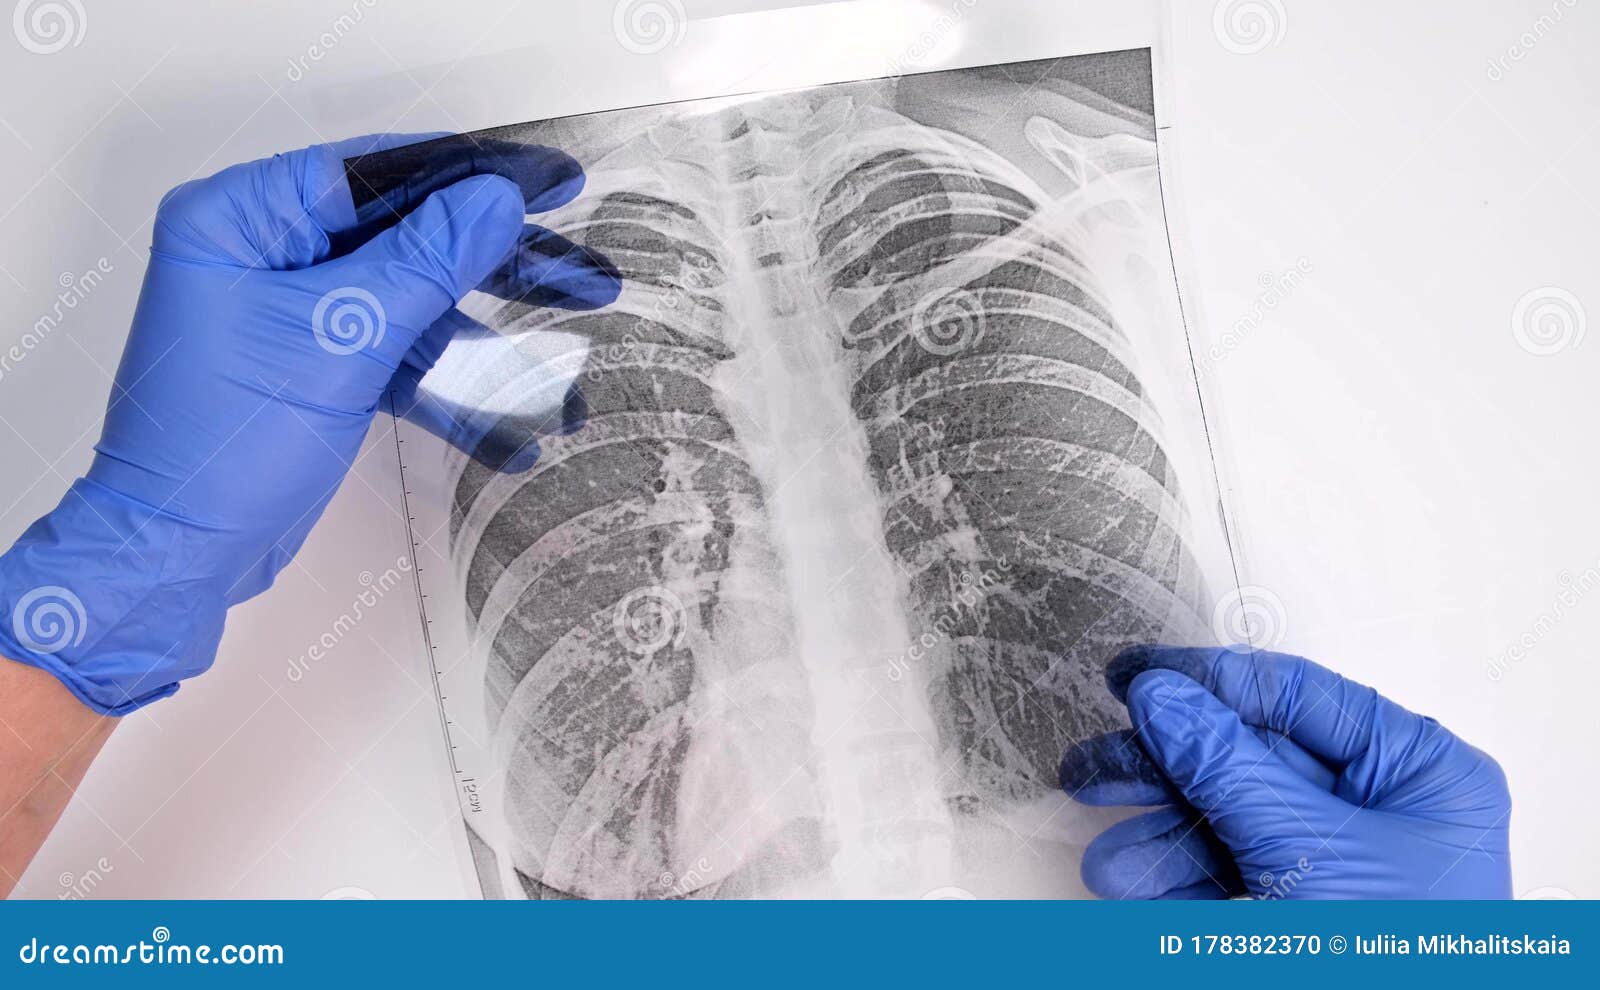 hands of a doctor in blue gloves examining, checking fluorography, x-ray of a patient during epidemia, pneumonia and bronchitis